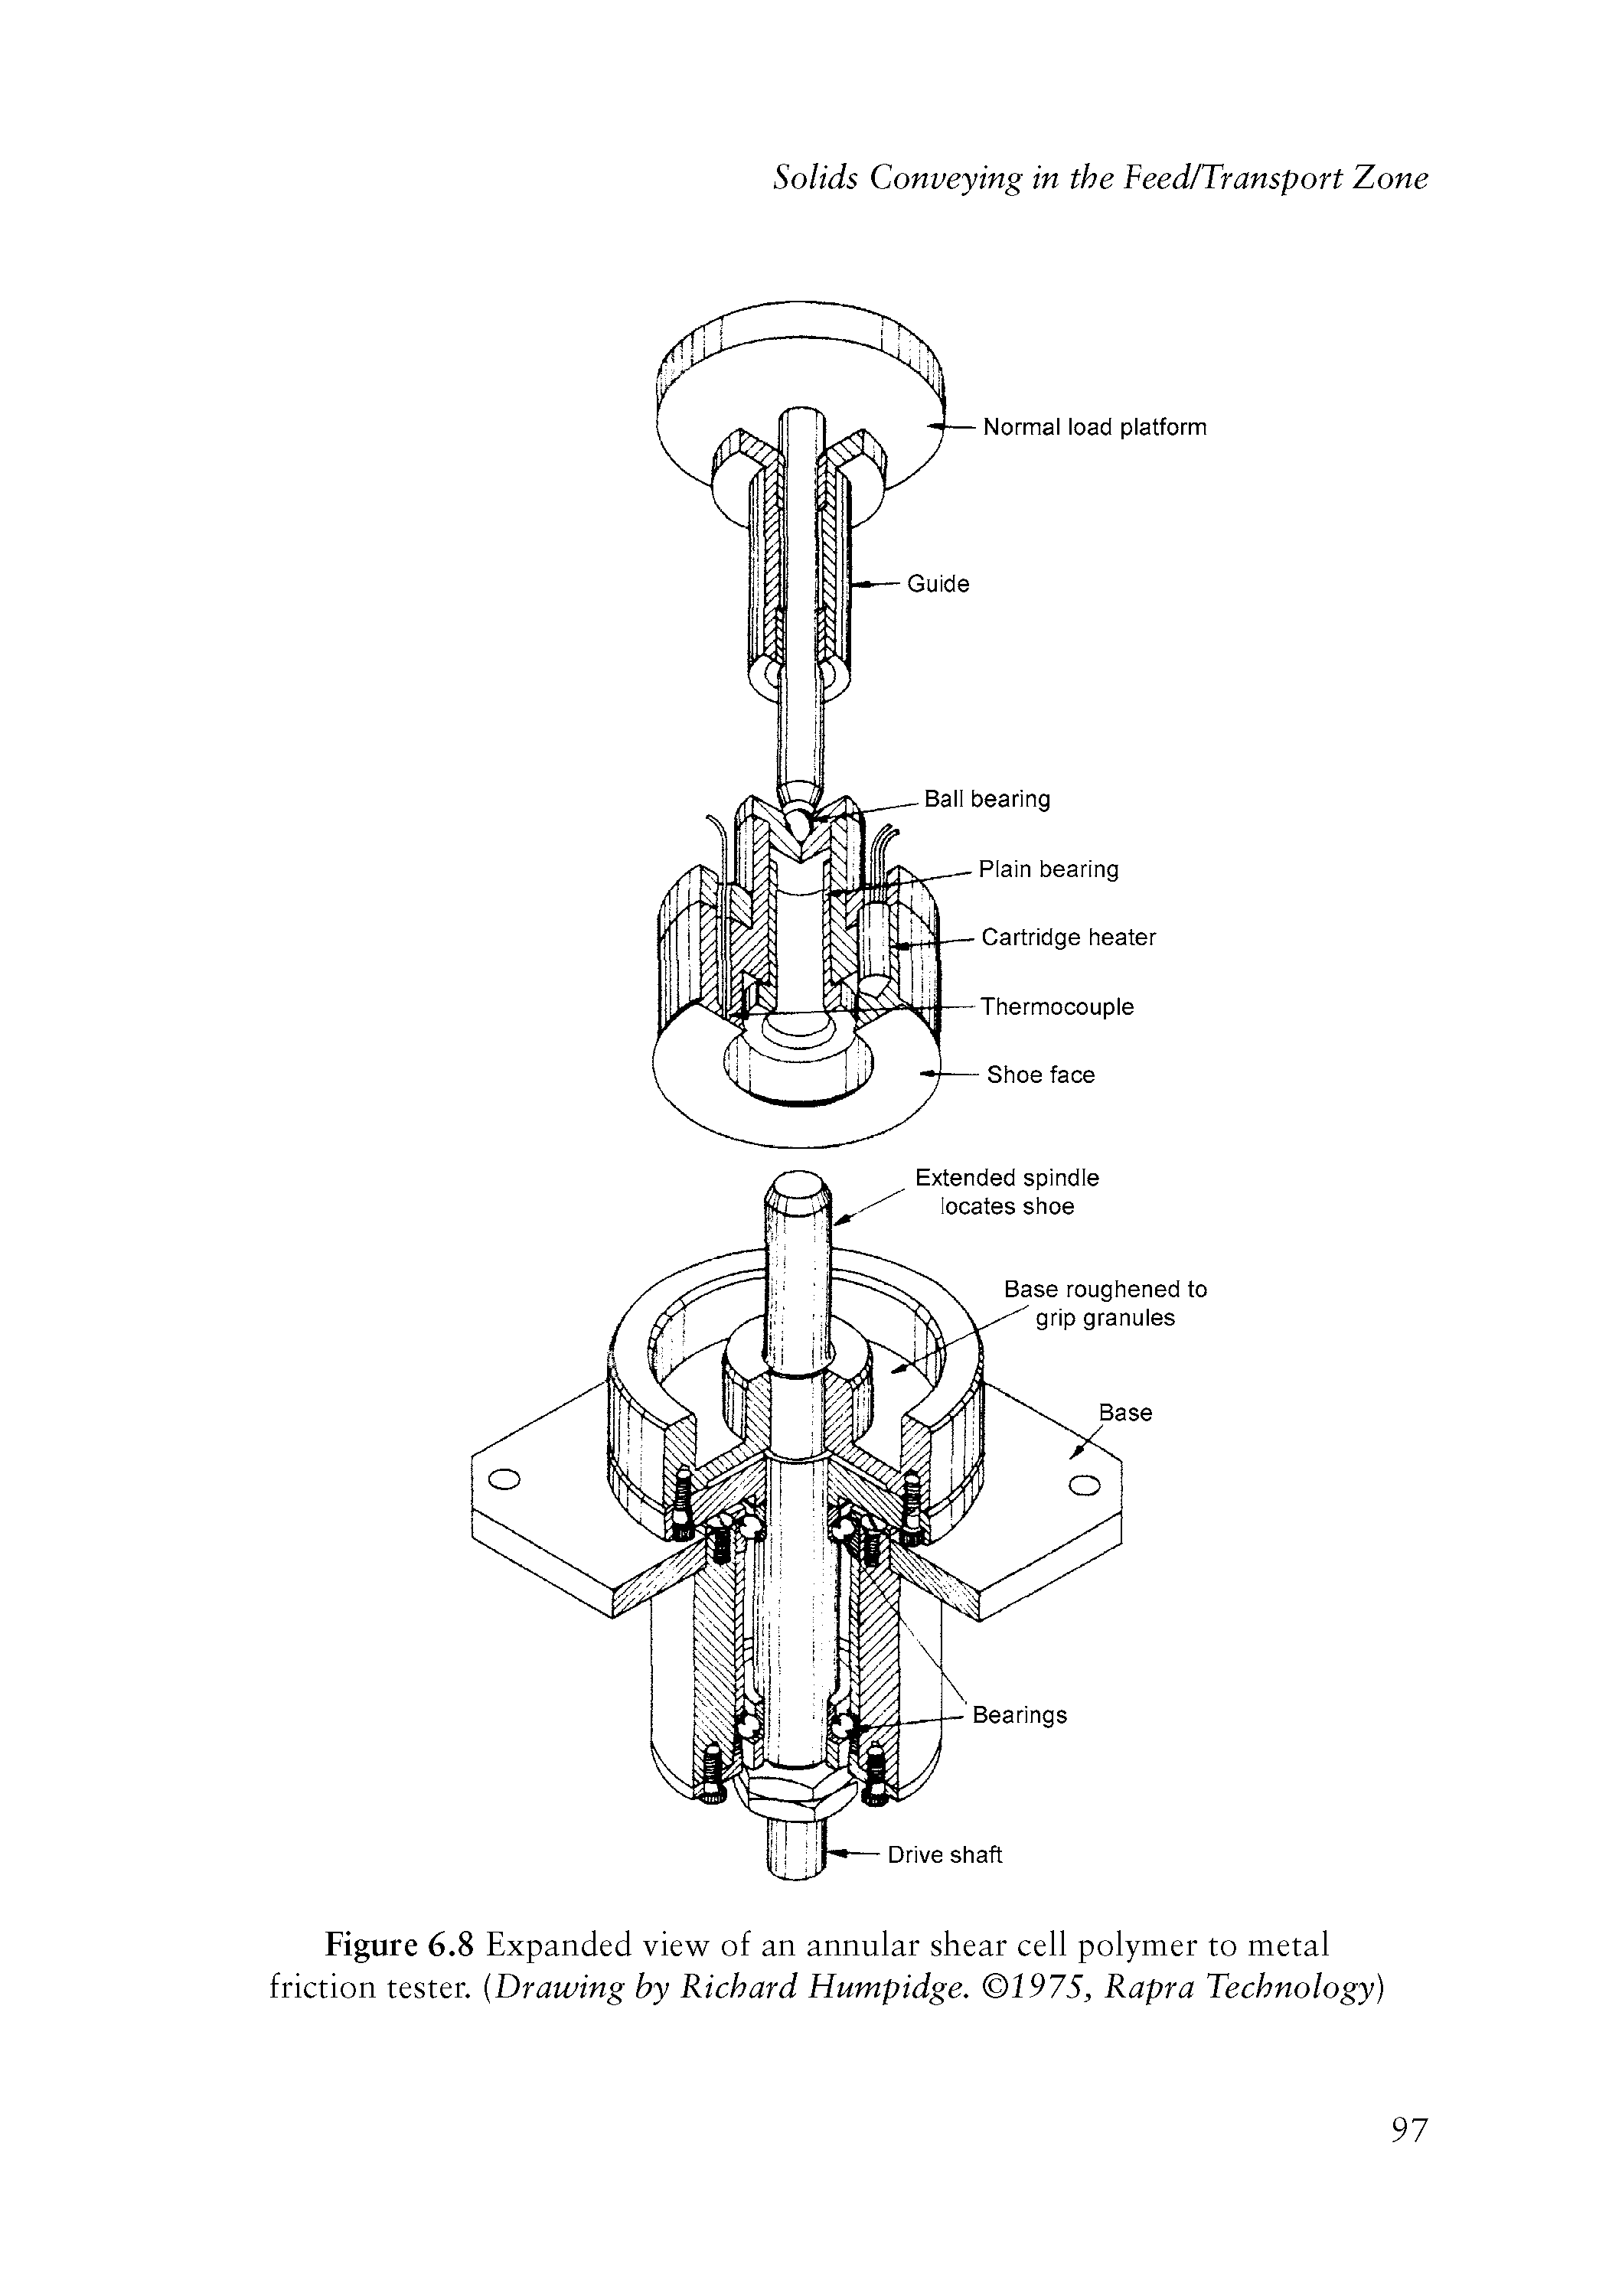 Figure 6.8 Expanded view of an annular shear cell polymer to metal friction tester. Drawing by Richard Humpidge. 1975, Rapra Technology)...